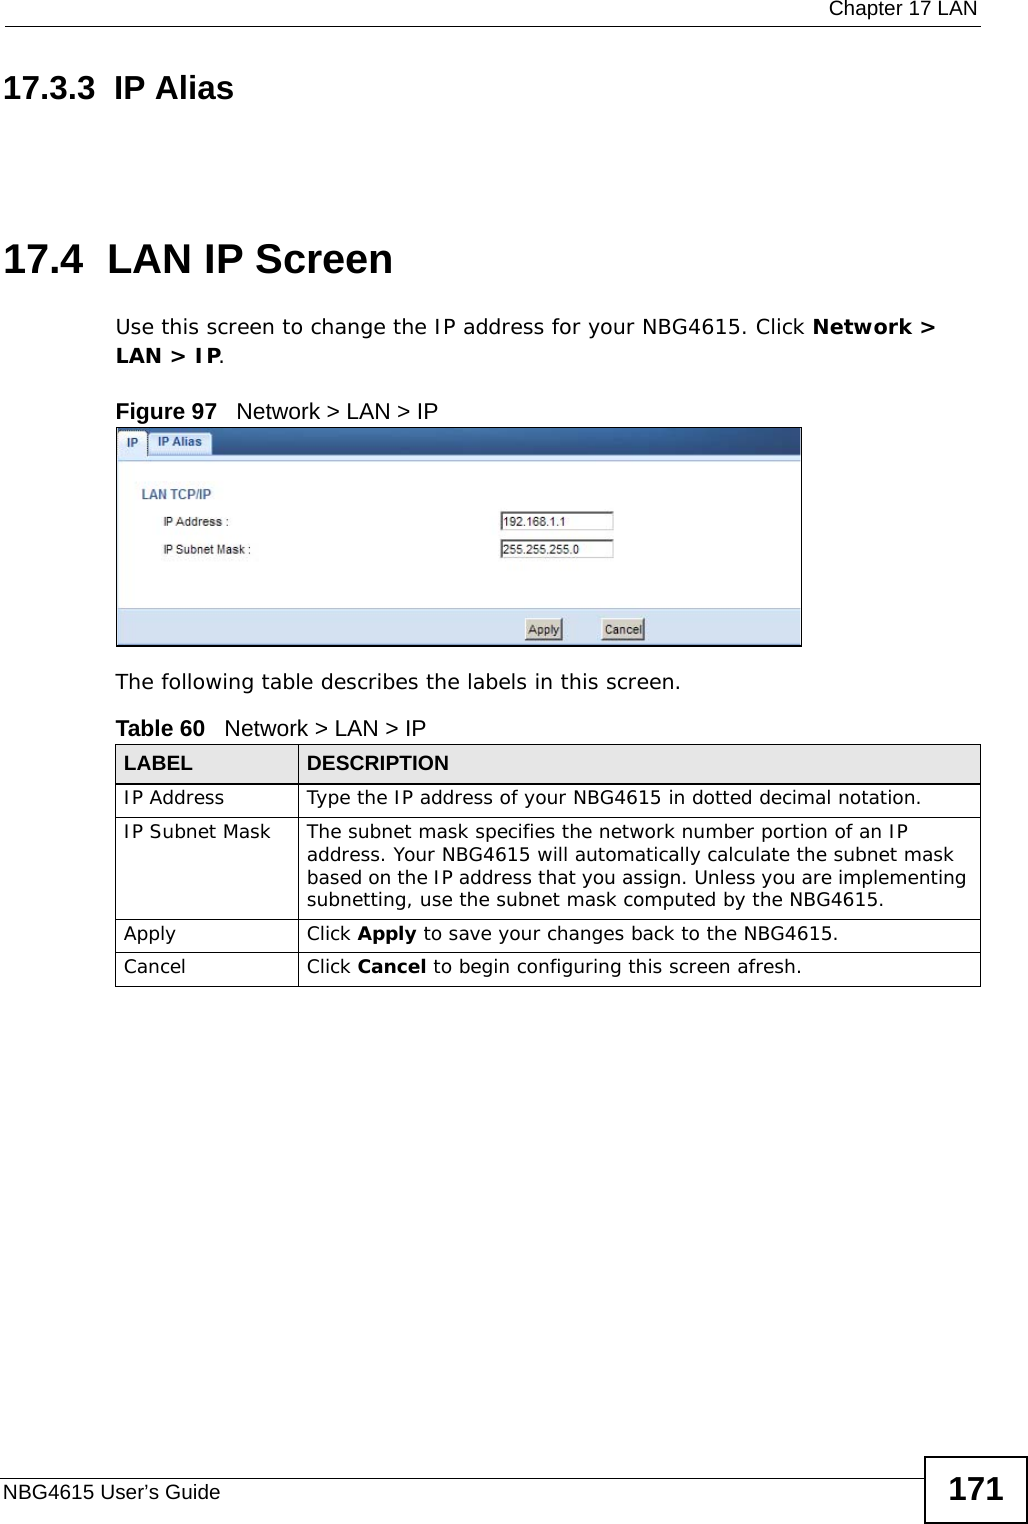  Chapter 17 LANNBG4615 User’s Guide 17117.3.3  IP Alias17.4  LAN IP ScreenUse this screen to change the IP address for your NBG4615. Click Network &gt; LAN &gt; IP.Figure 97   Network &gt; LAN &gt; IP The following table describes the labels in this screen.Table 60   Network &gt; LAN &gt; IPLABEL DESCRIPTIONIP Address Type the IP address of your NBG4615 in dotted decimal notation.IP Subnet Mask The subnet mask specifies the network number portion of an IP address. Your NBG4615 will automatically calculate the subnet mask based on the IP address that you assign. Unless you are implementing subnetting, use the subnet mask computed by the NBG4615.Apply Click Apply to save your changes back to the NBG4615.Cancel Click Cancel to begin configuring this screen afresh.